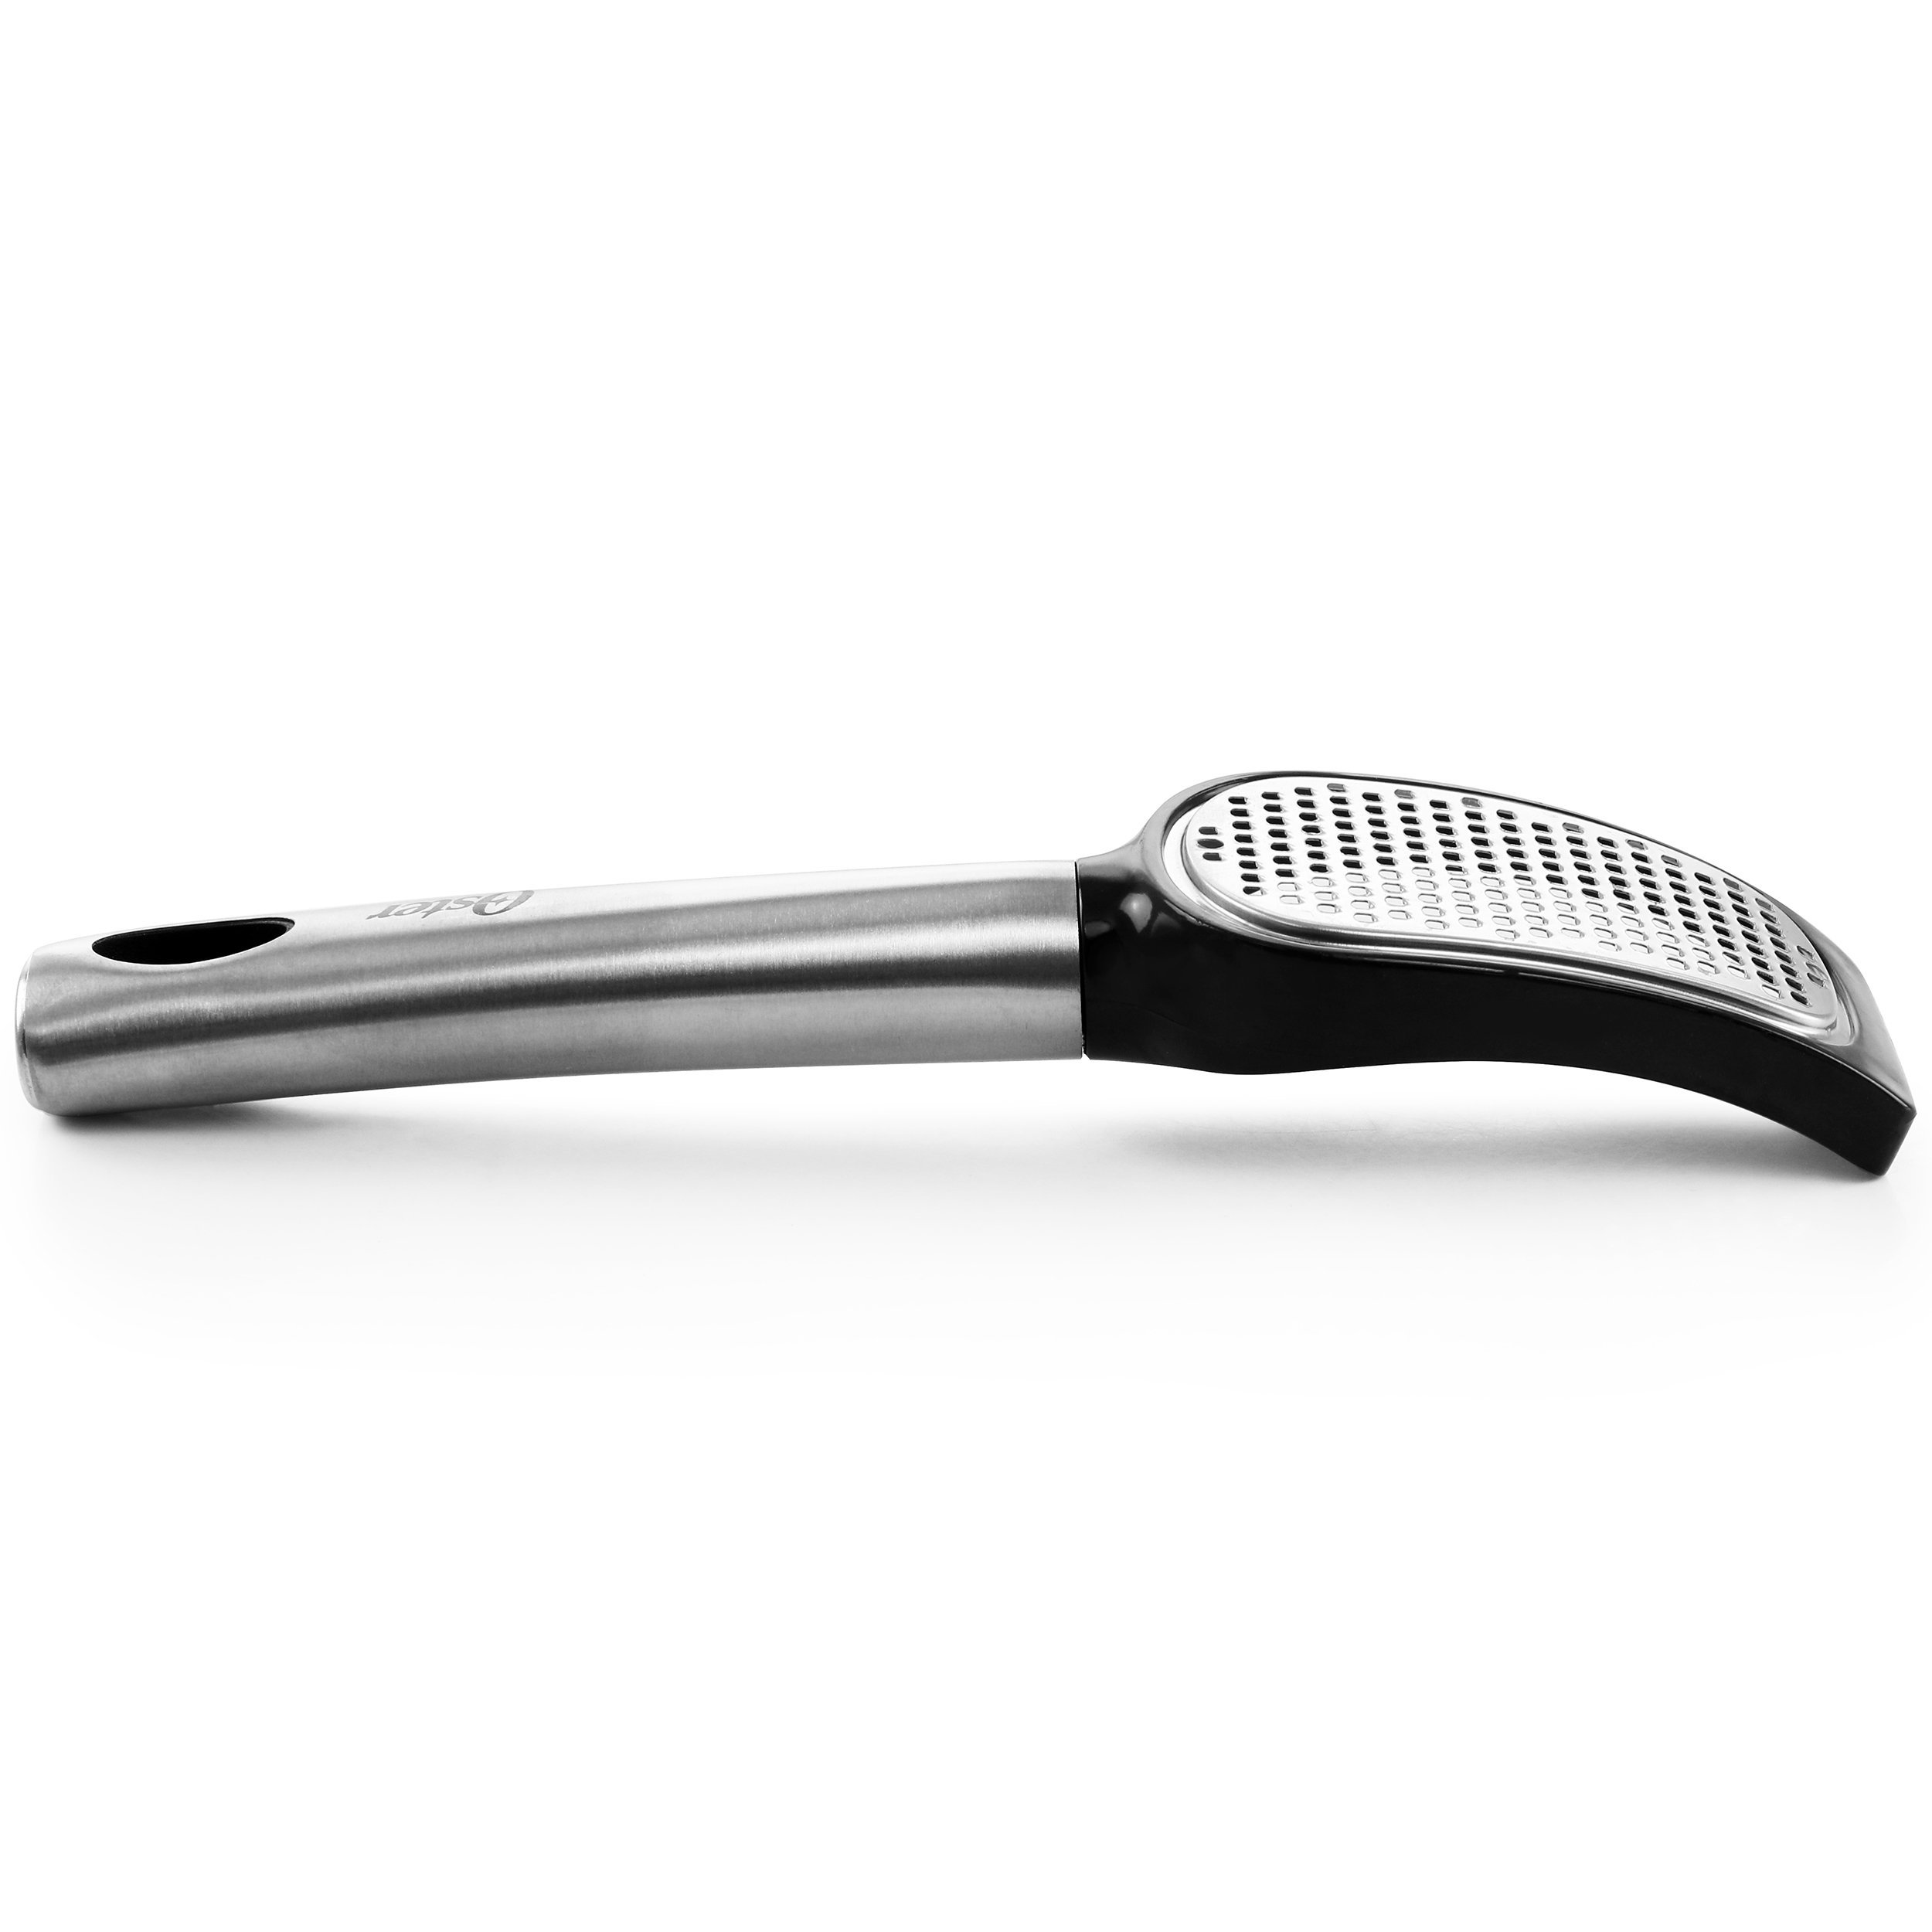 Oster Baldwyn Stainless Steel And Plastic Handheld Kitchen Grater